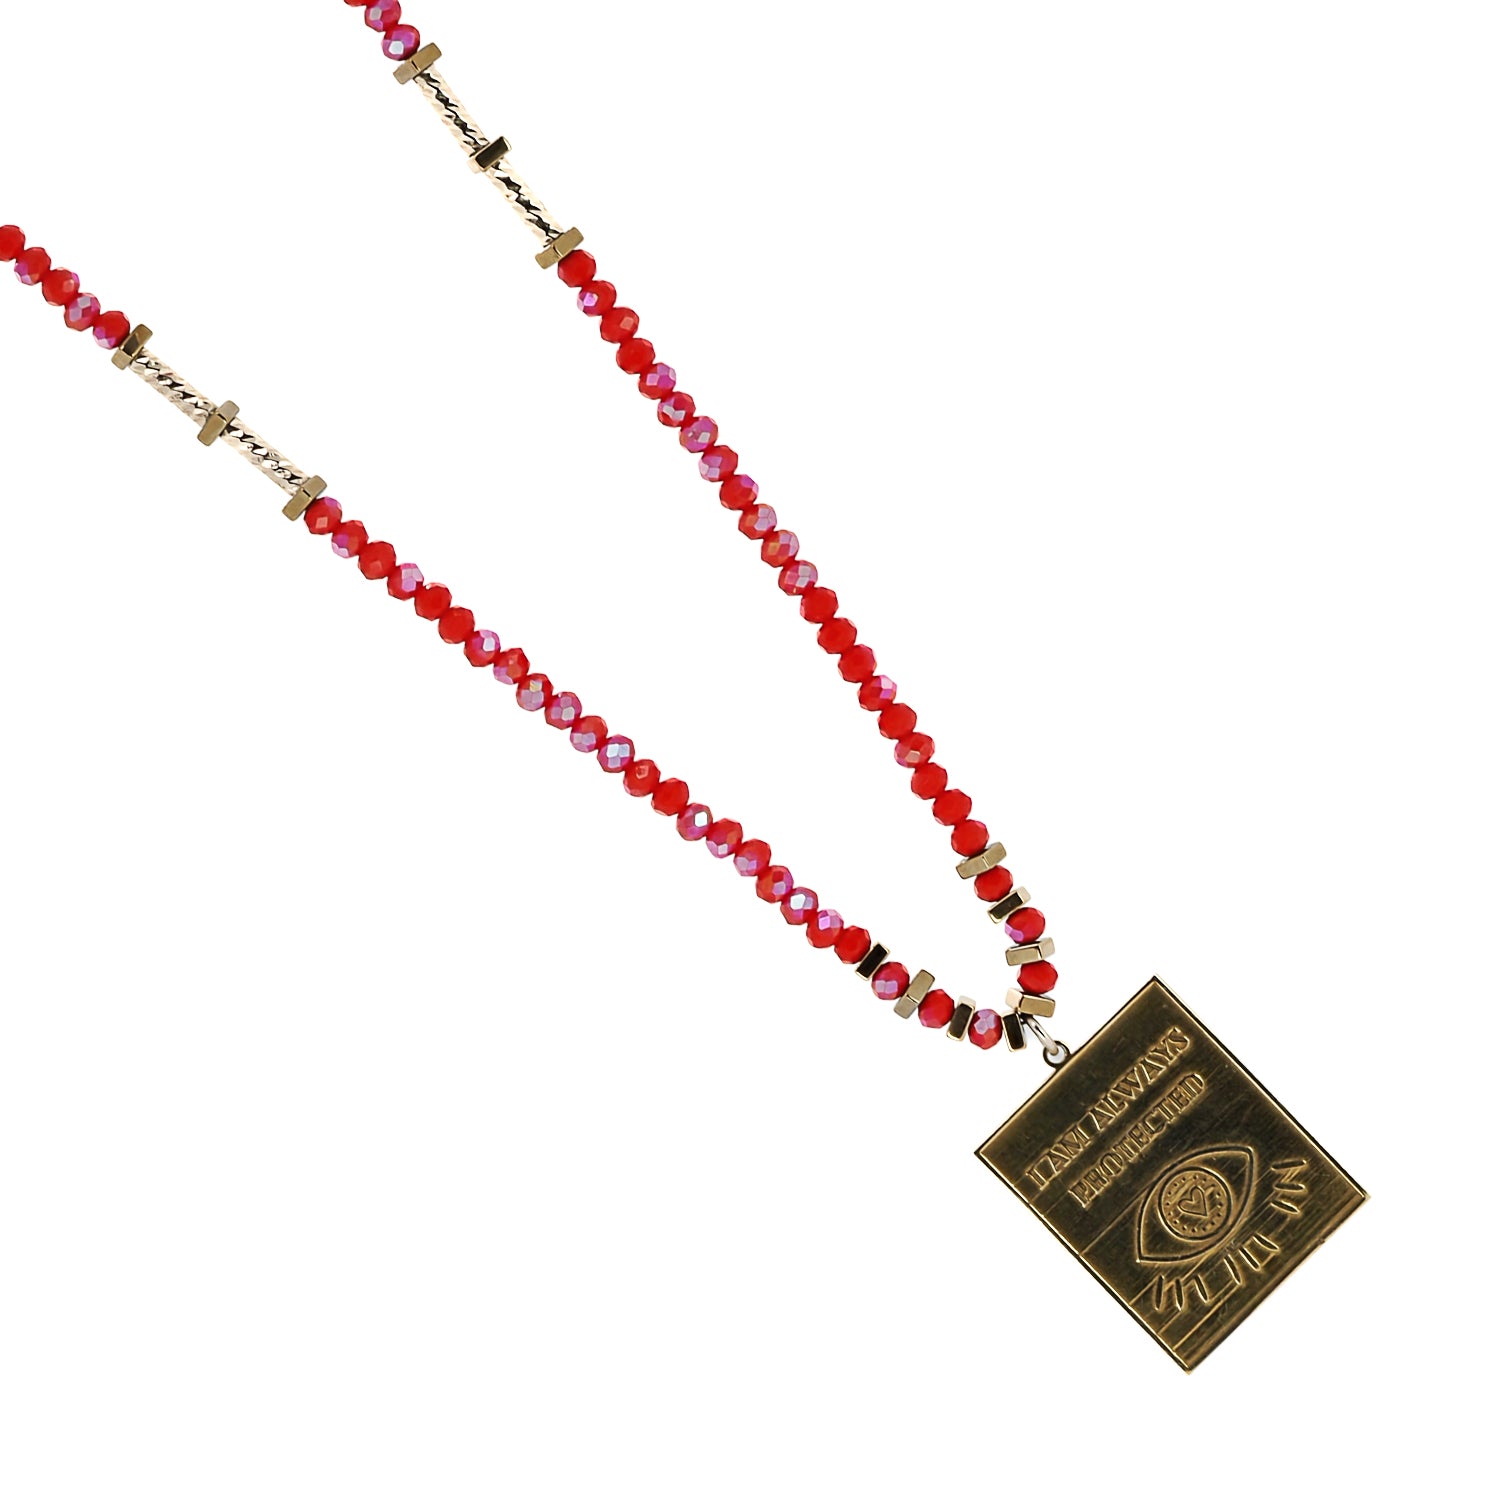 &quot;Gold will protect you&quot; - Reinforcing the Necklace&#39;s Purpose.